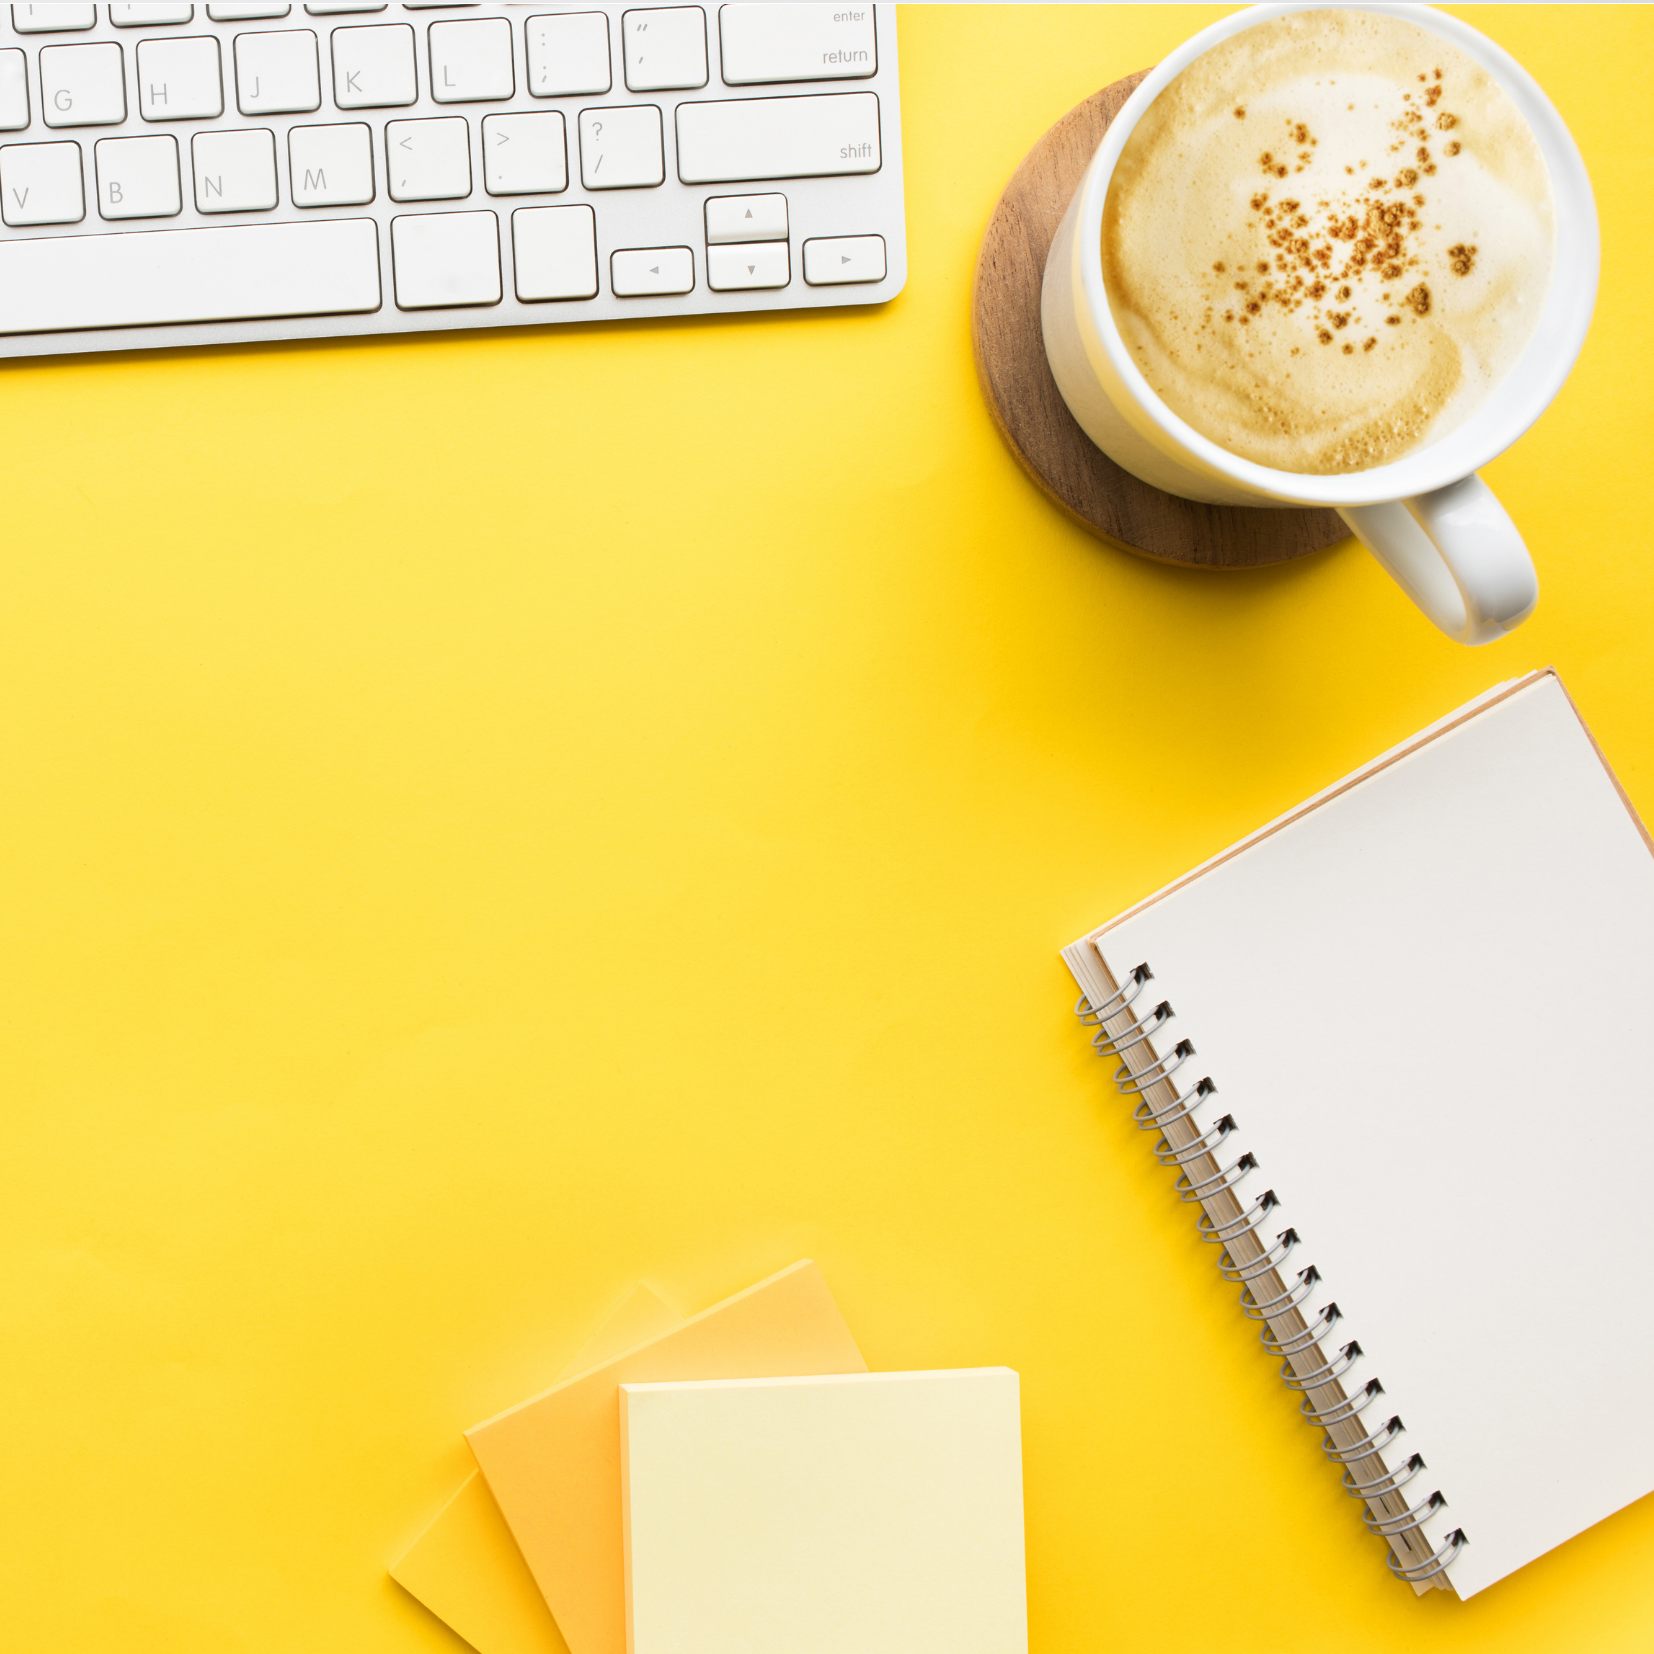 Coffee, Notebook & Keyboard on Yellow Background depicting Consulting for Van Dusen Nutrition